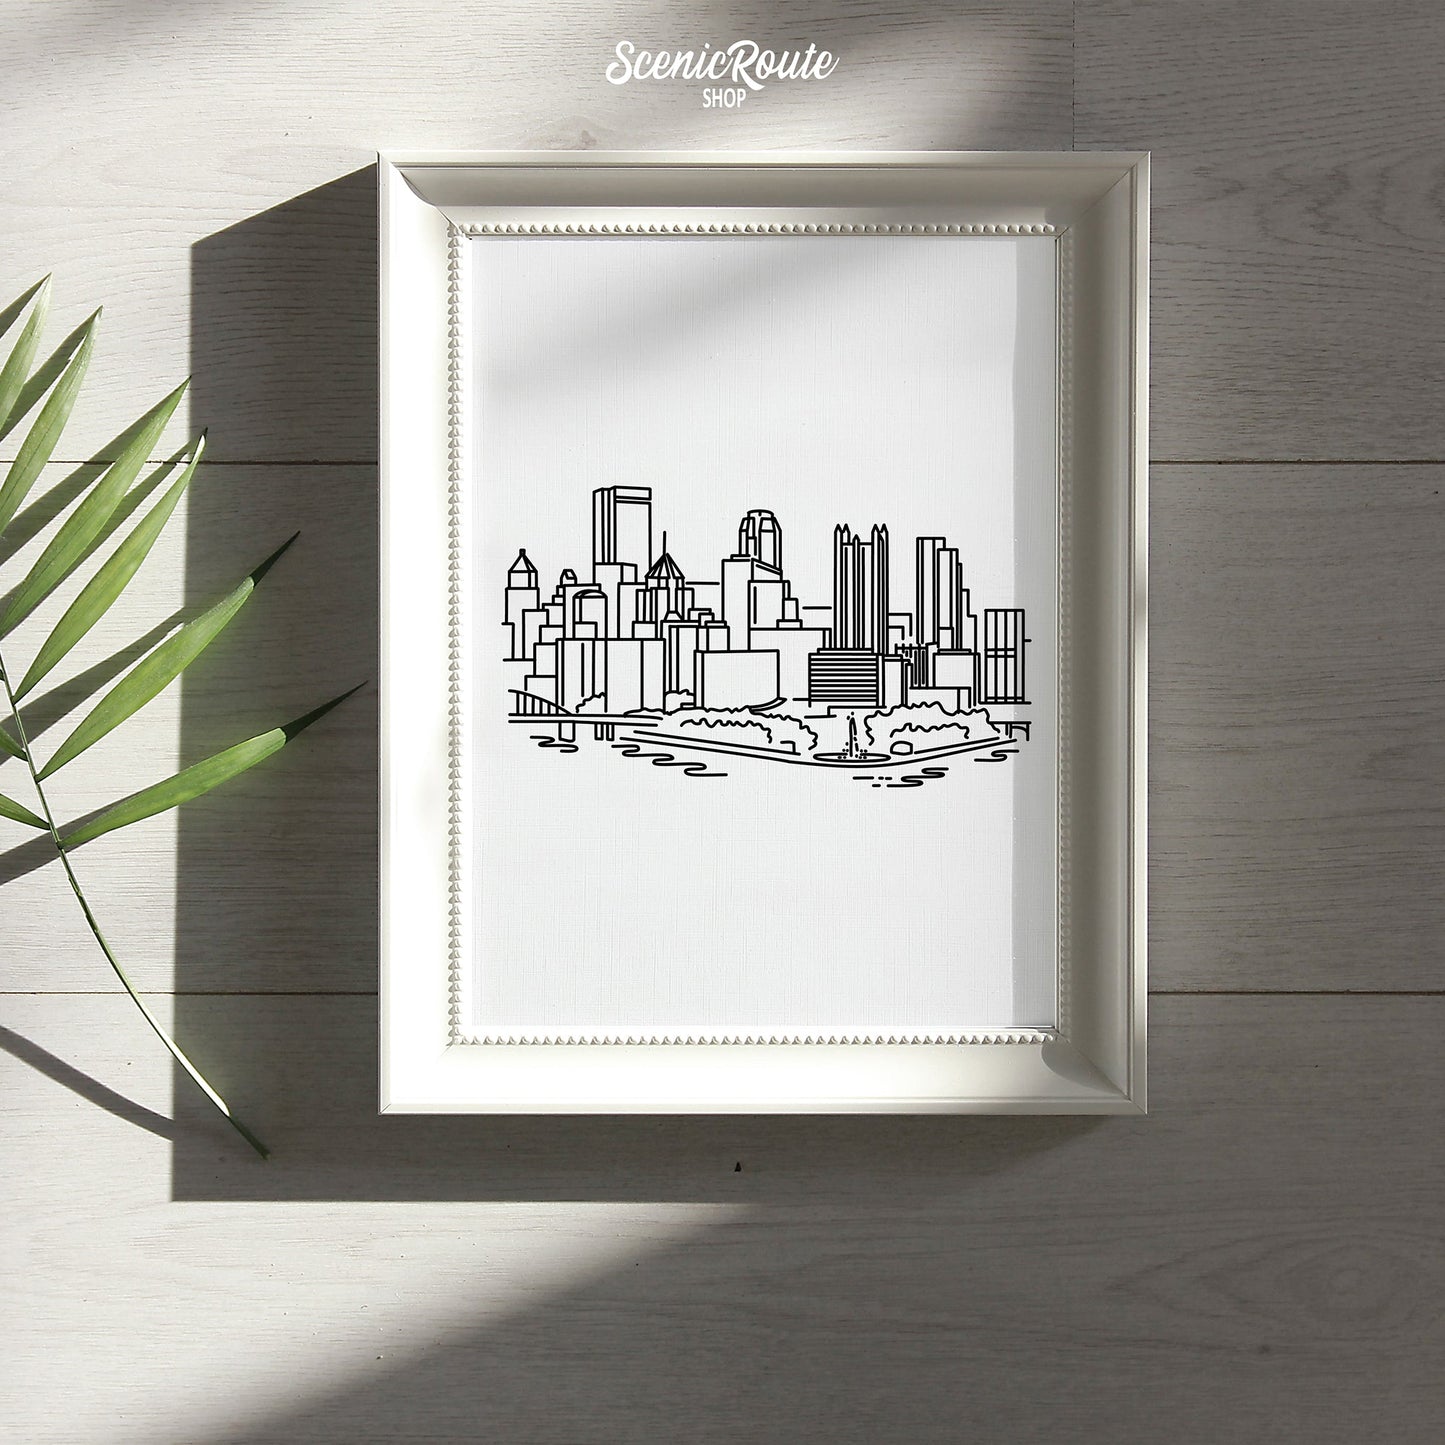 A framed line art drawing of the Pittsburgh Skyline laying on a wood table with a palm frond